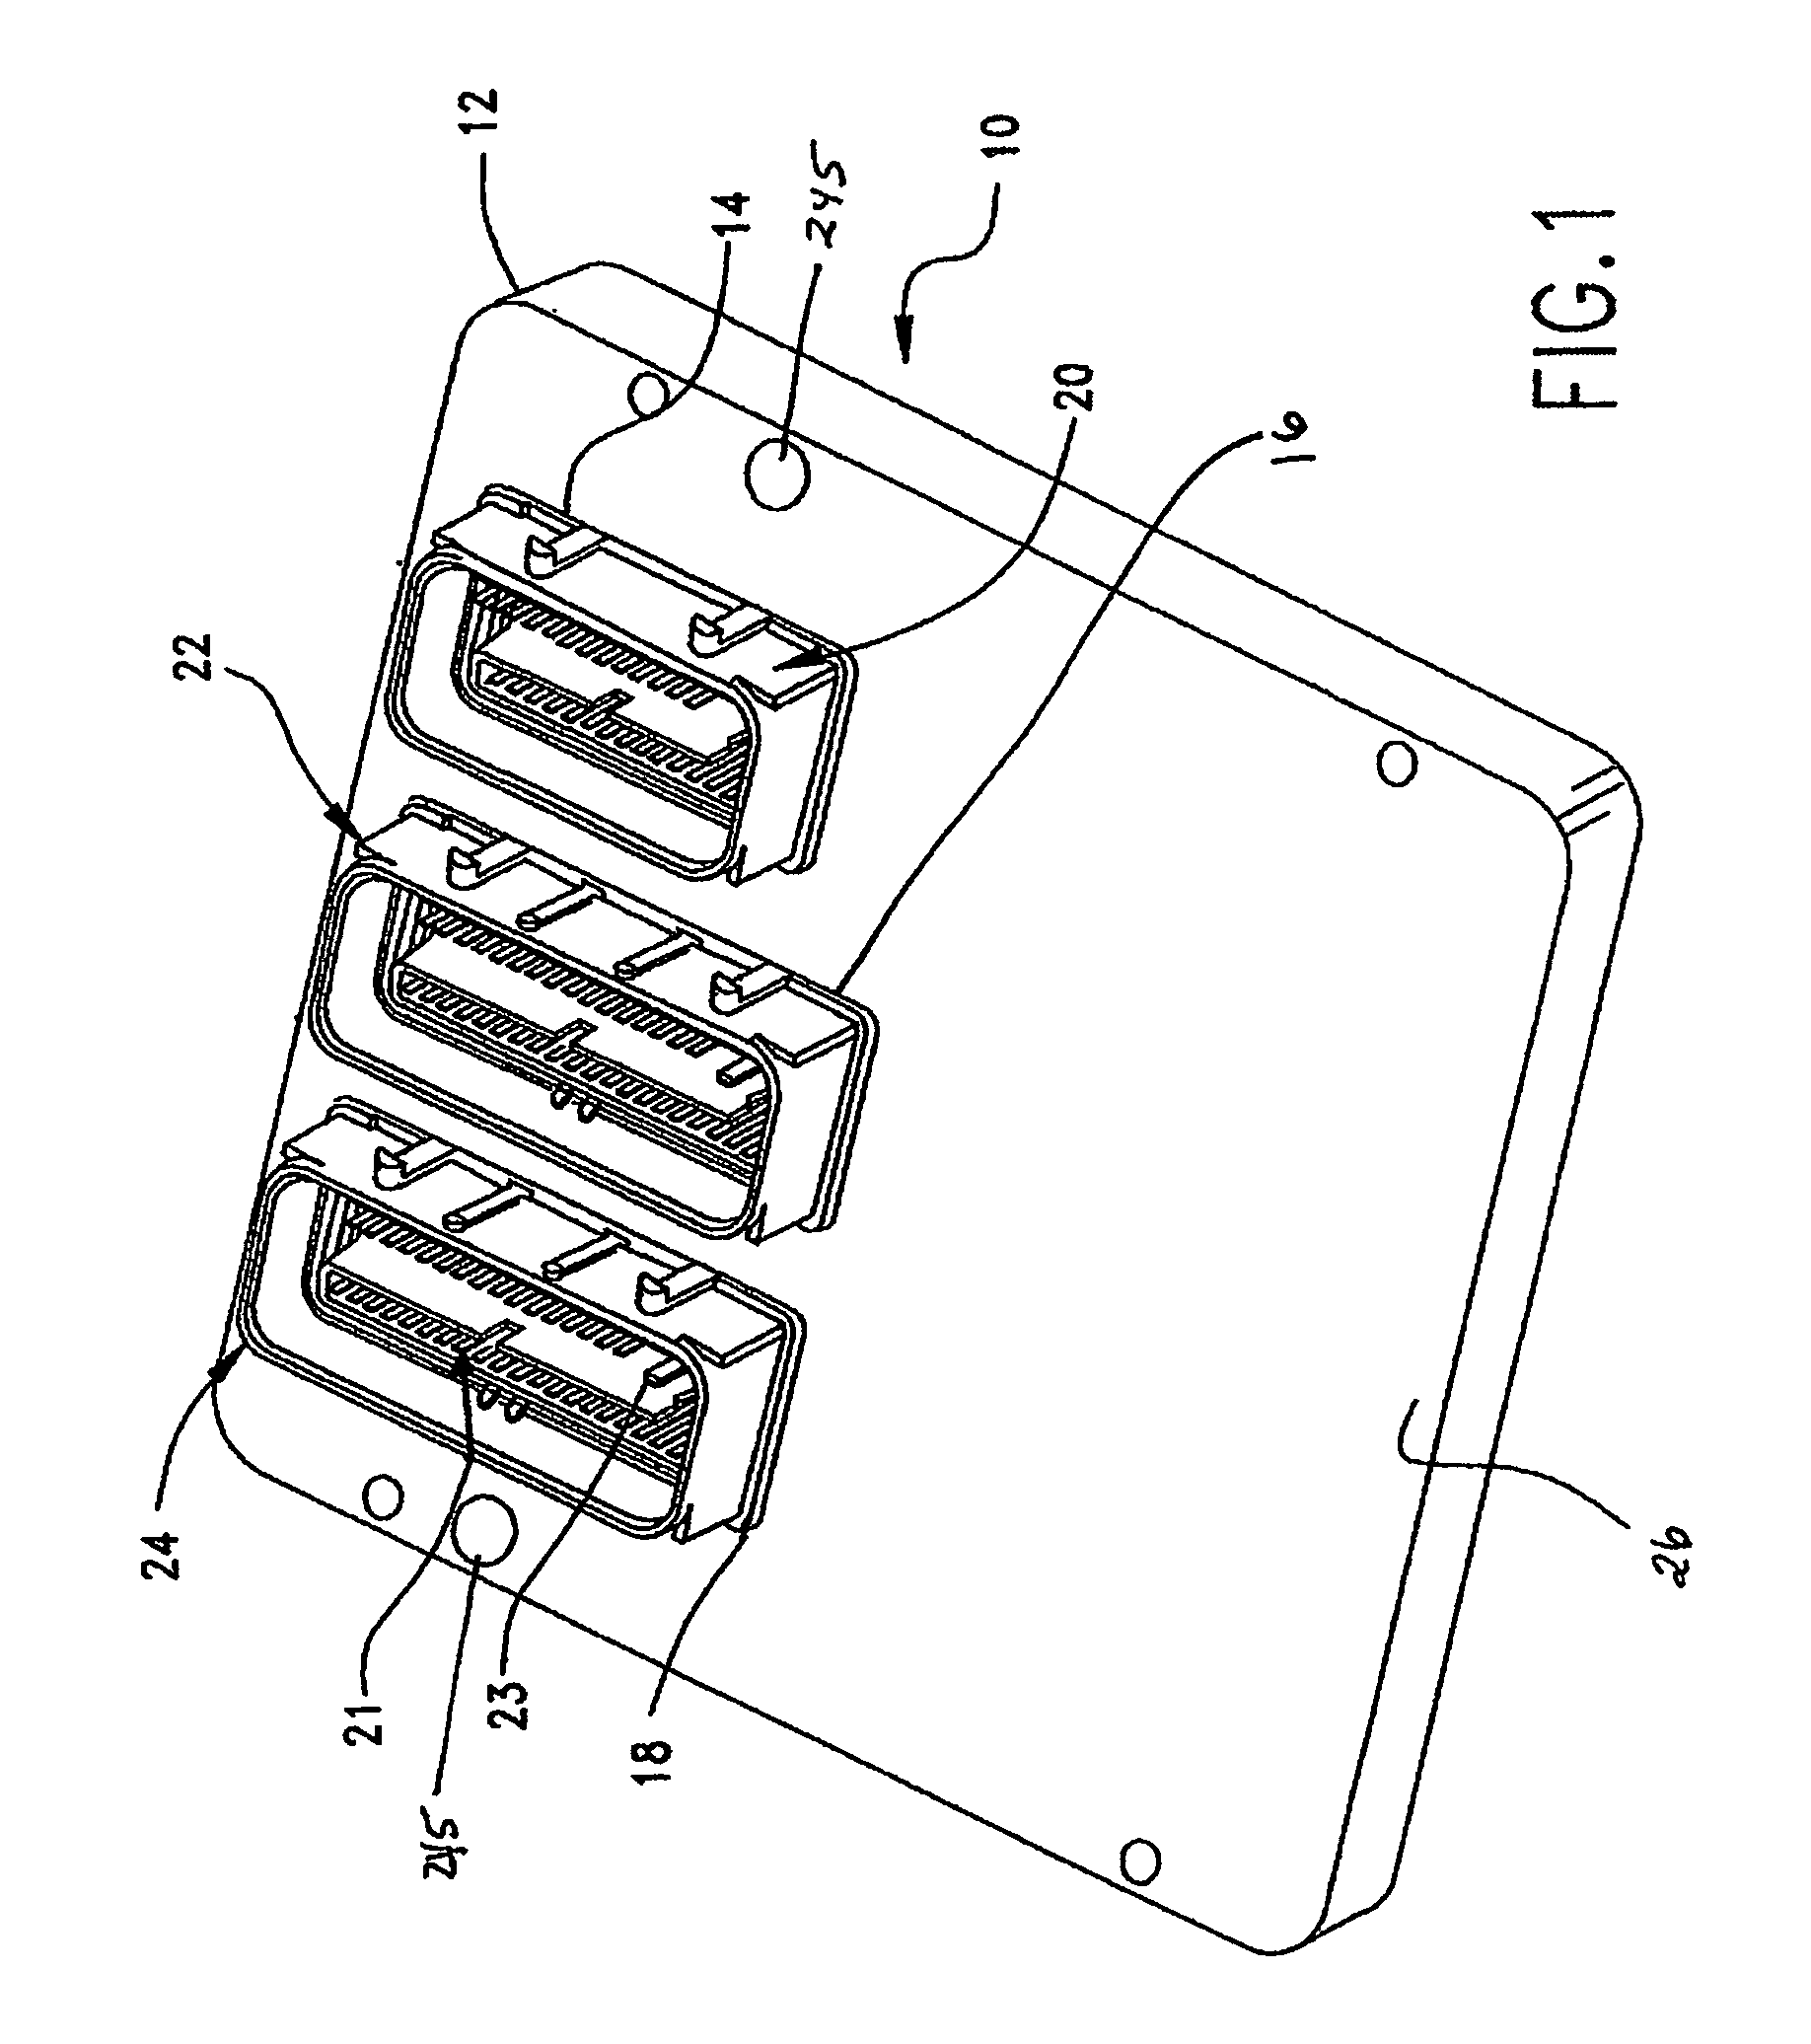 Compliant pin control module and method for making the same